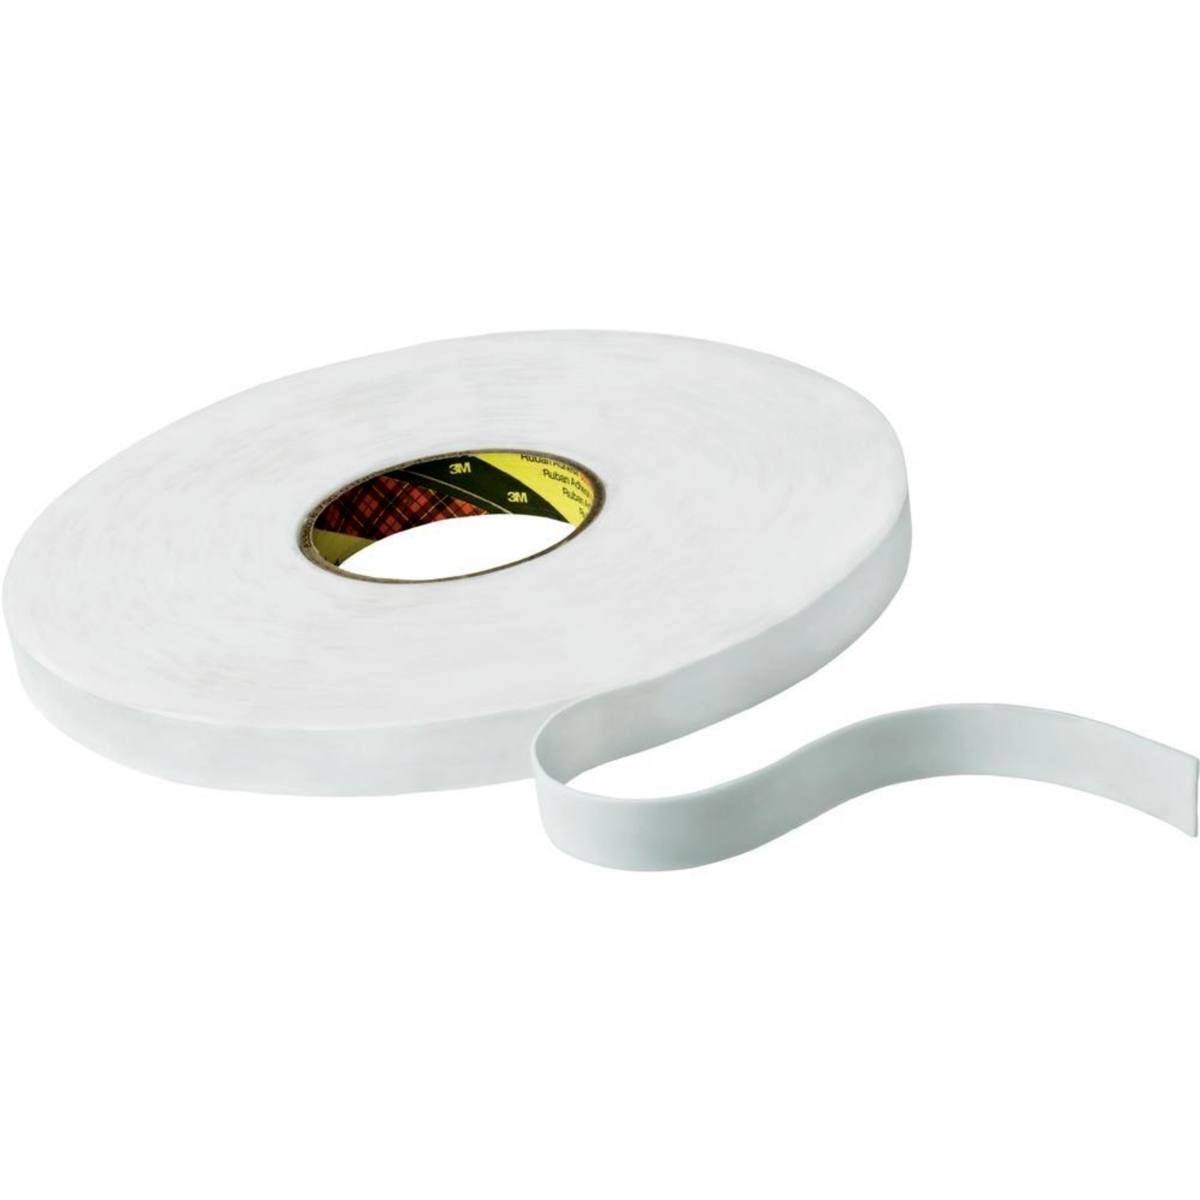 3M Double-sided PE foam tape with acrylic adhesive 9508W, white, 15 mm x 66 m, 0.8 mm